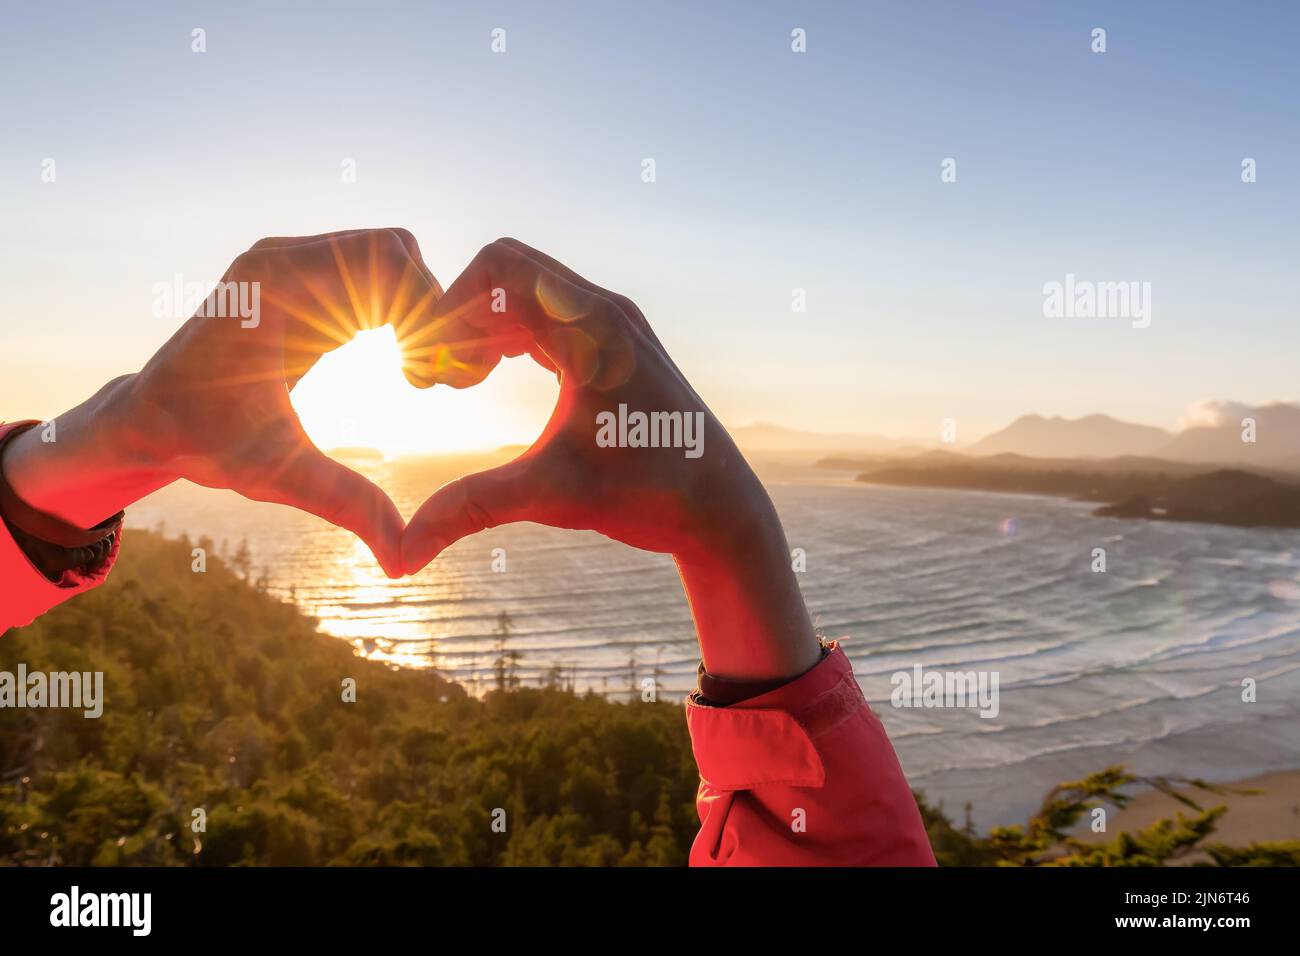 Adventurous Woman Hiker making heart shape with hands at Sandy Beach on the West Coast Stock Photo